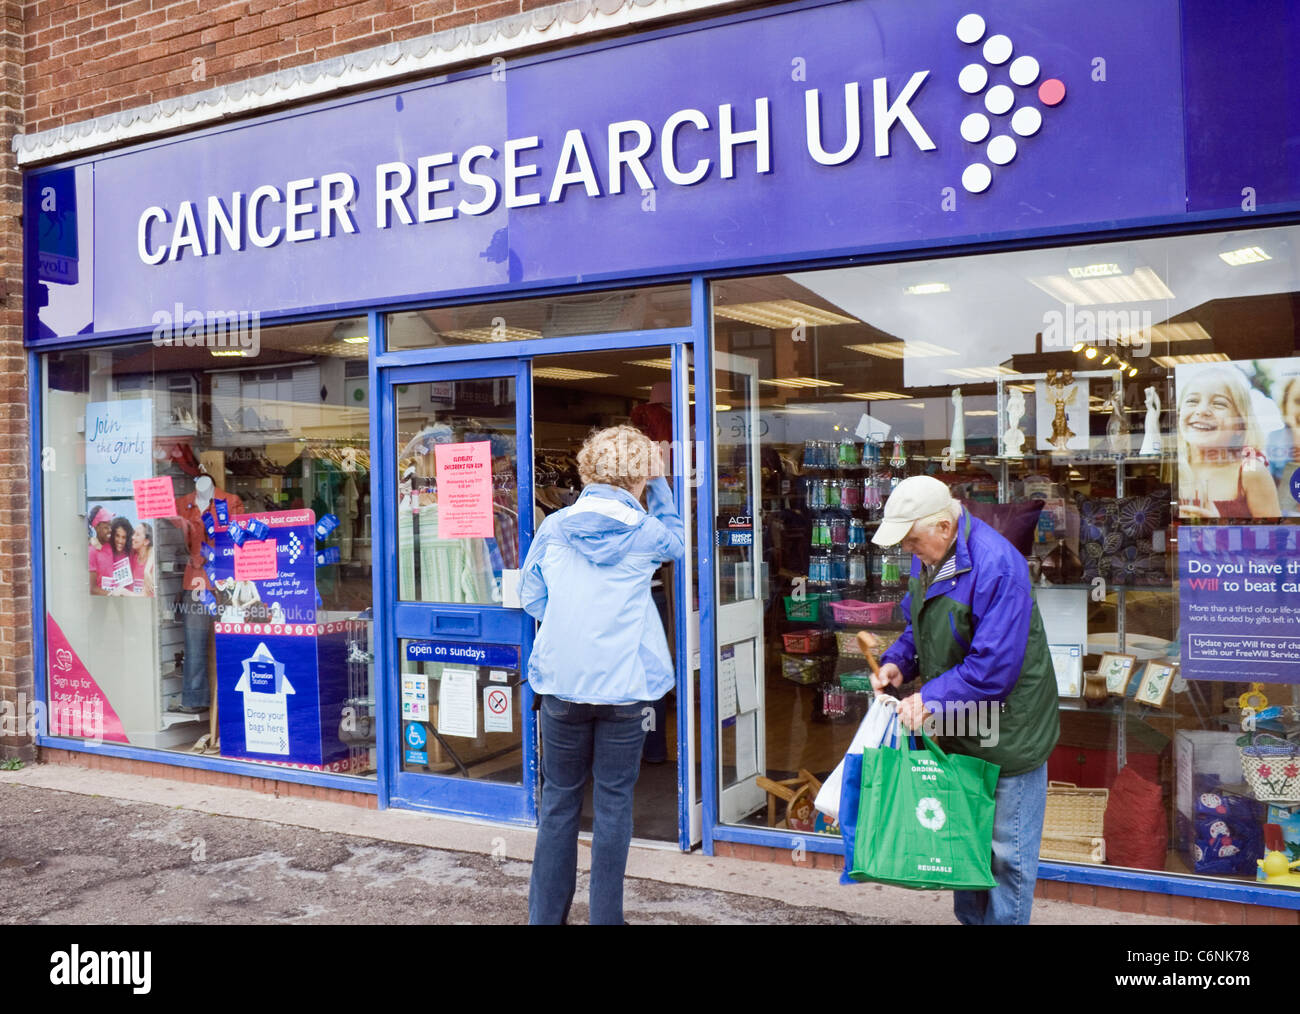 Cleveleys, Blackpool, Lancashire, England. Cancer Research UK Charity-Shop. Stockfoto